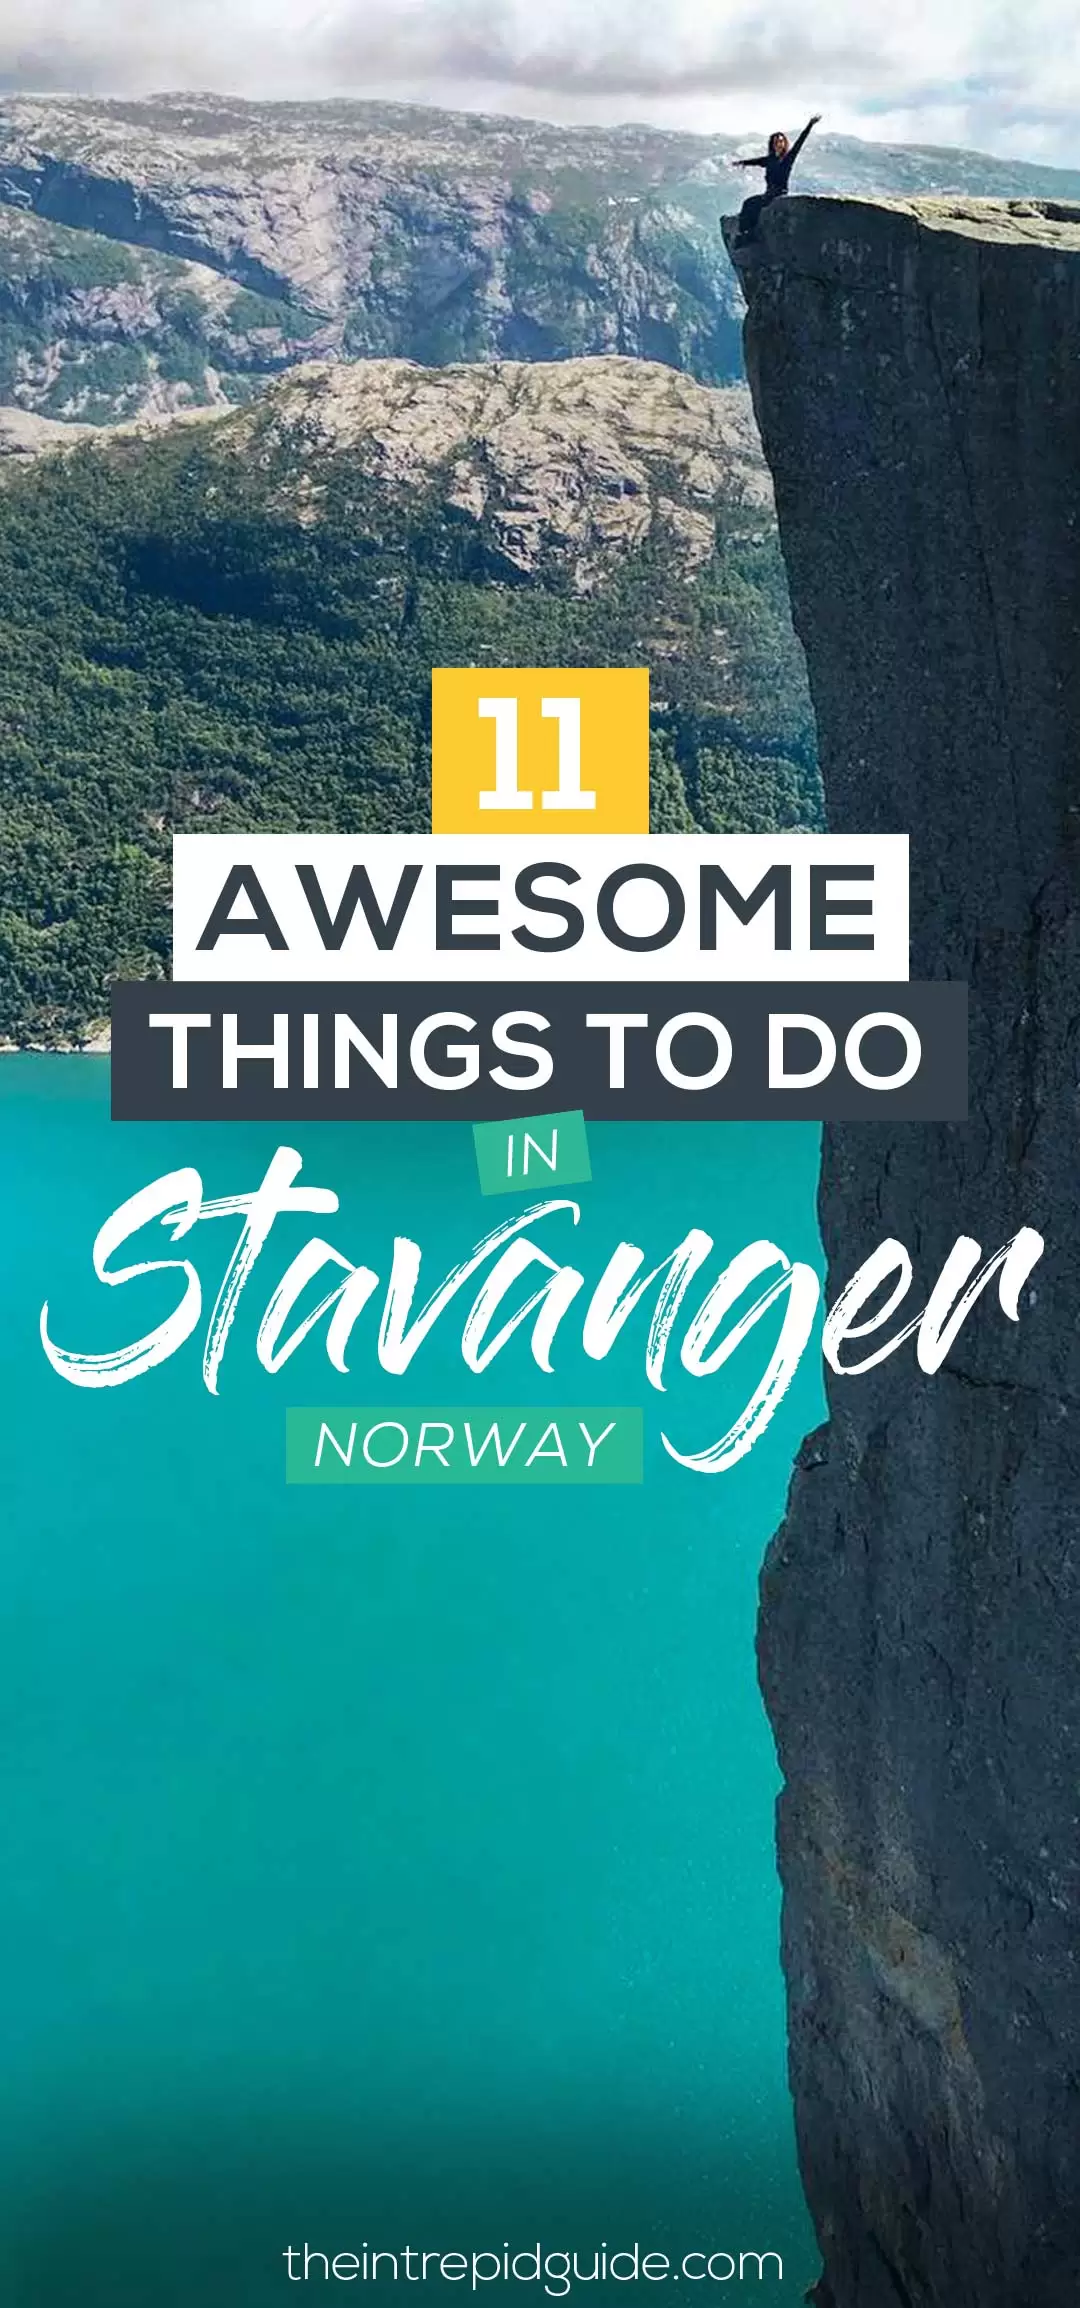 11 Awesome Things to do in Stavanger, Norway